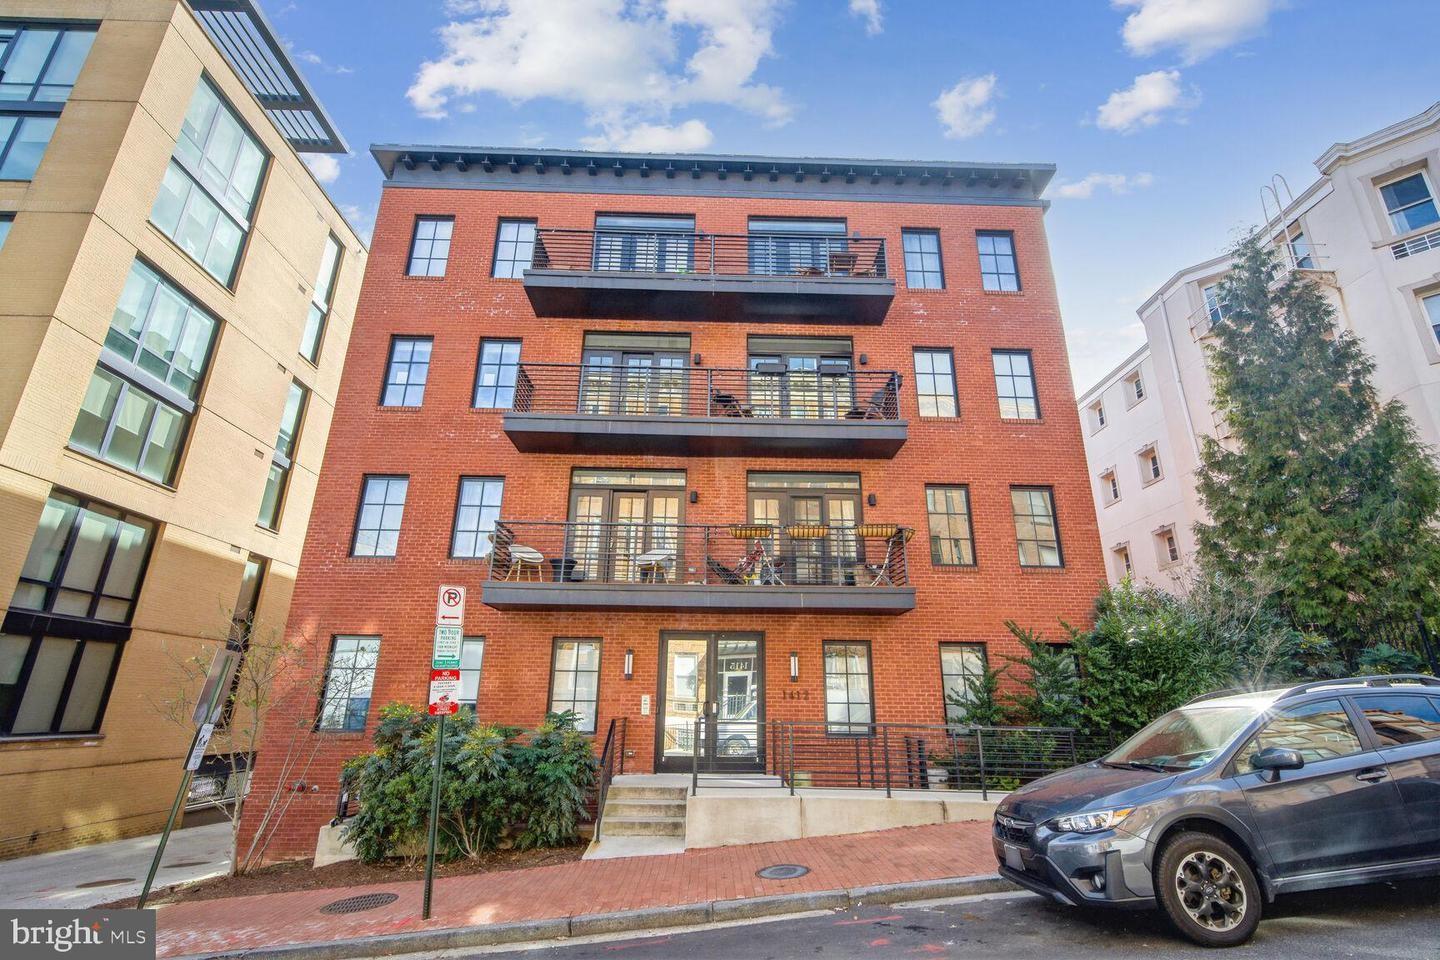 Property Image for 1412 Chapin St Nw #5